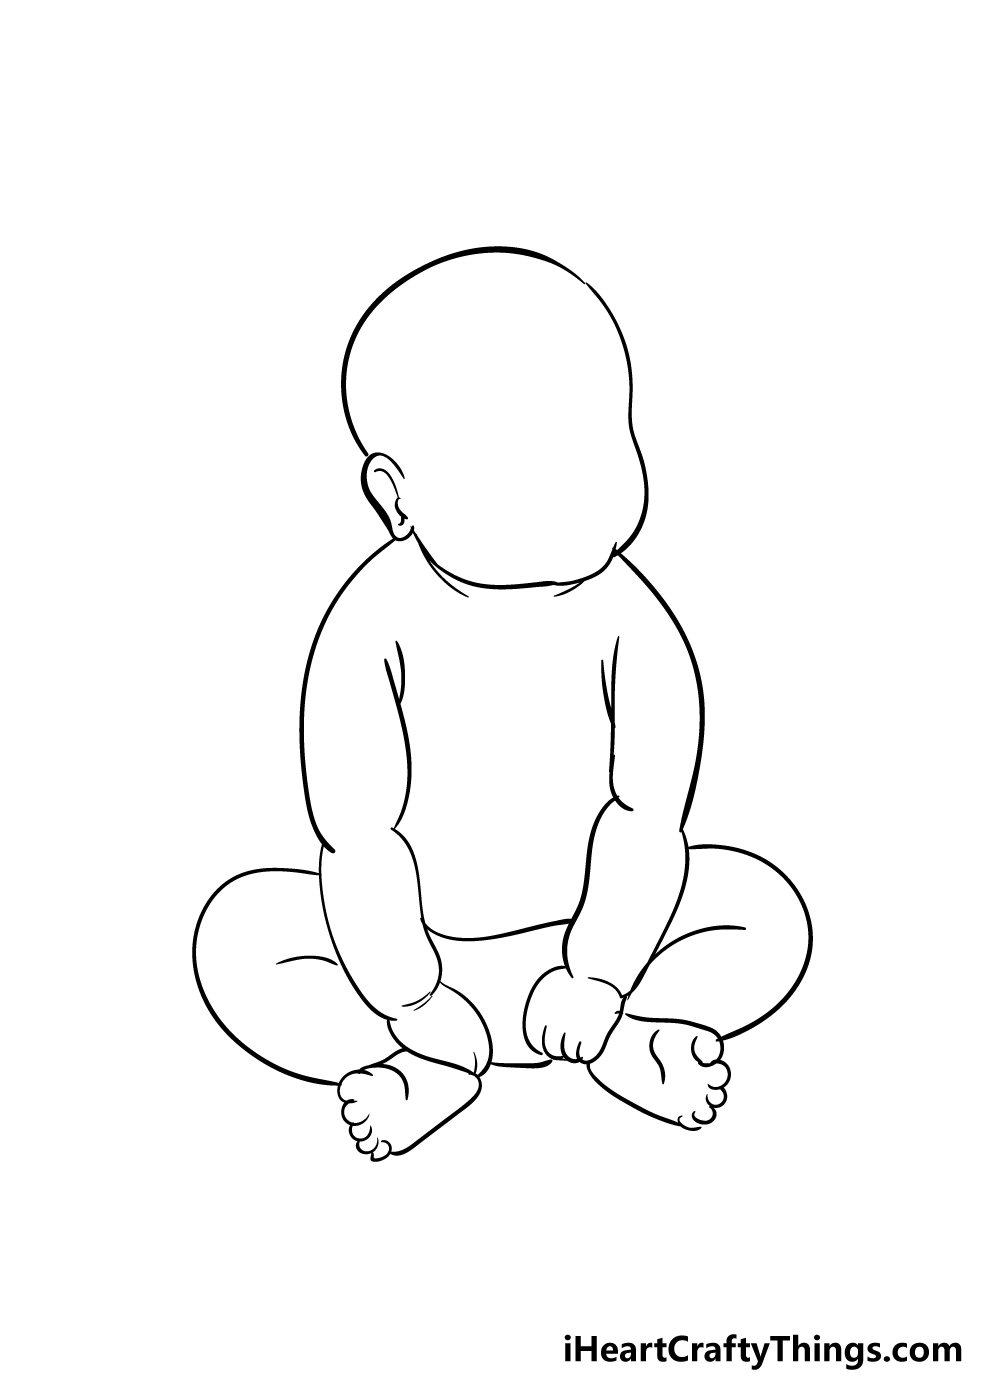 baby drawing step 4